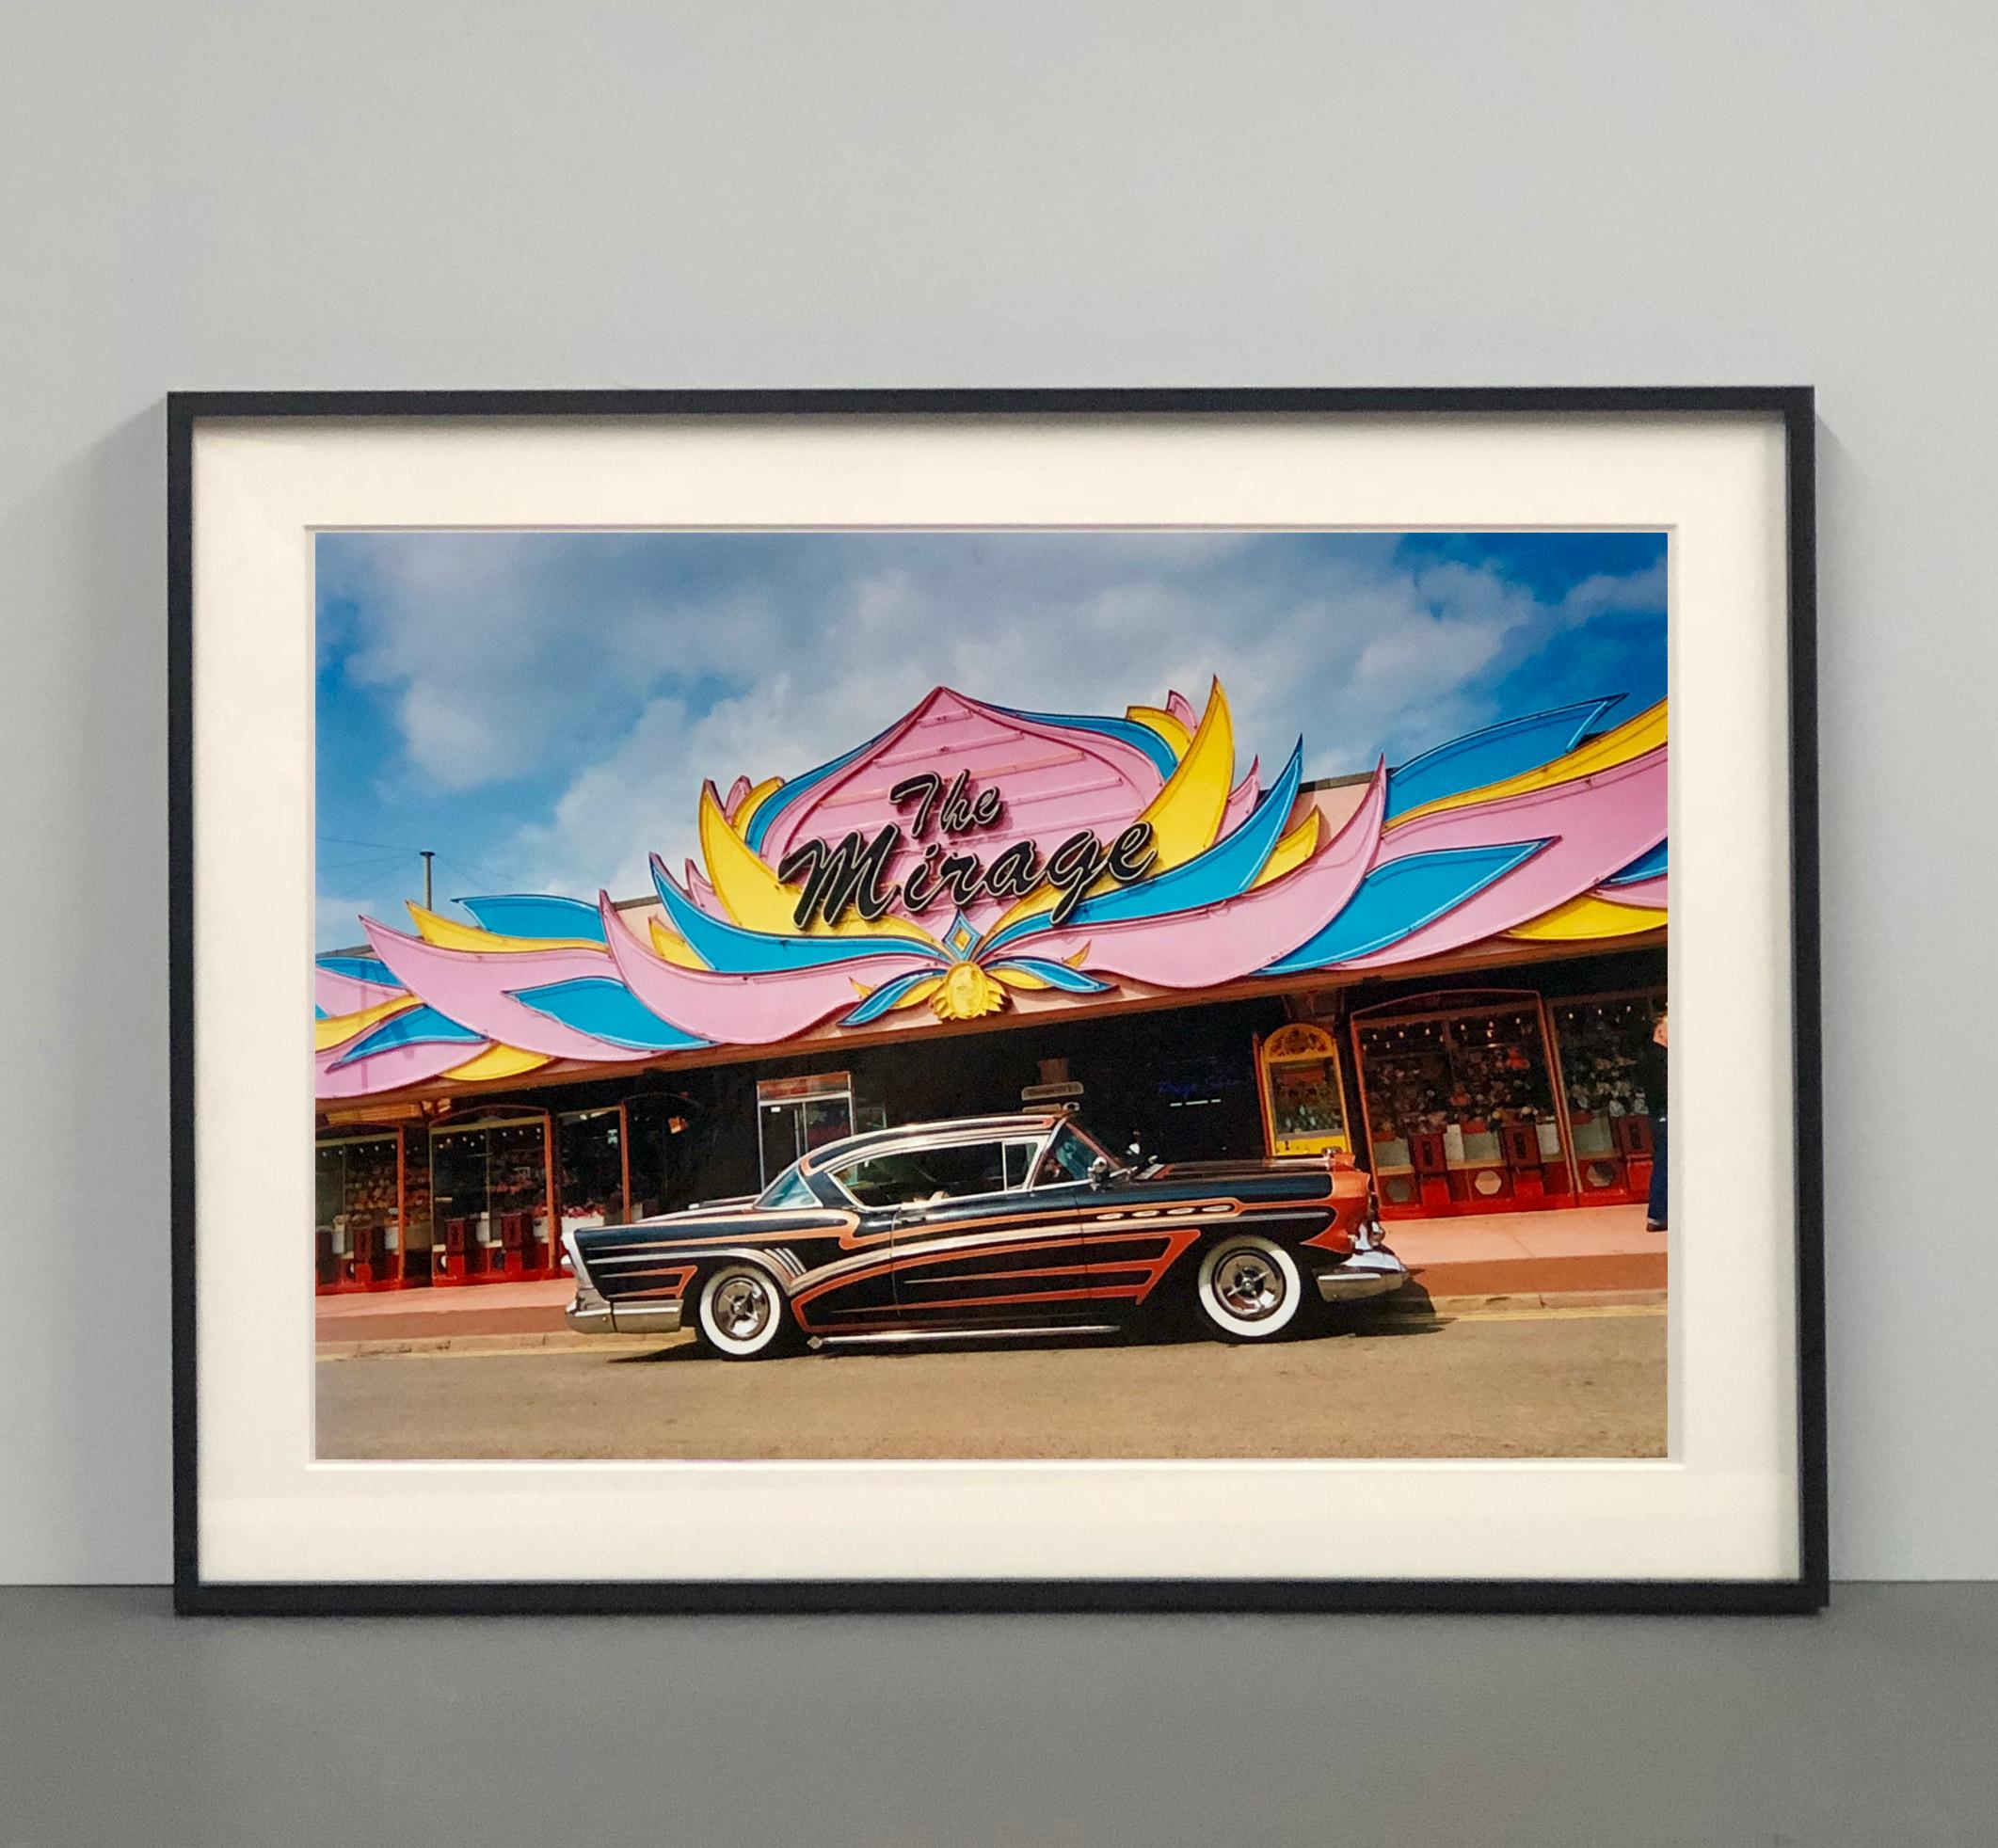 The Mirage, Norfolk - Contemporary color photography - Print by Richard Heeps